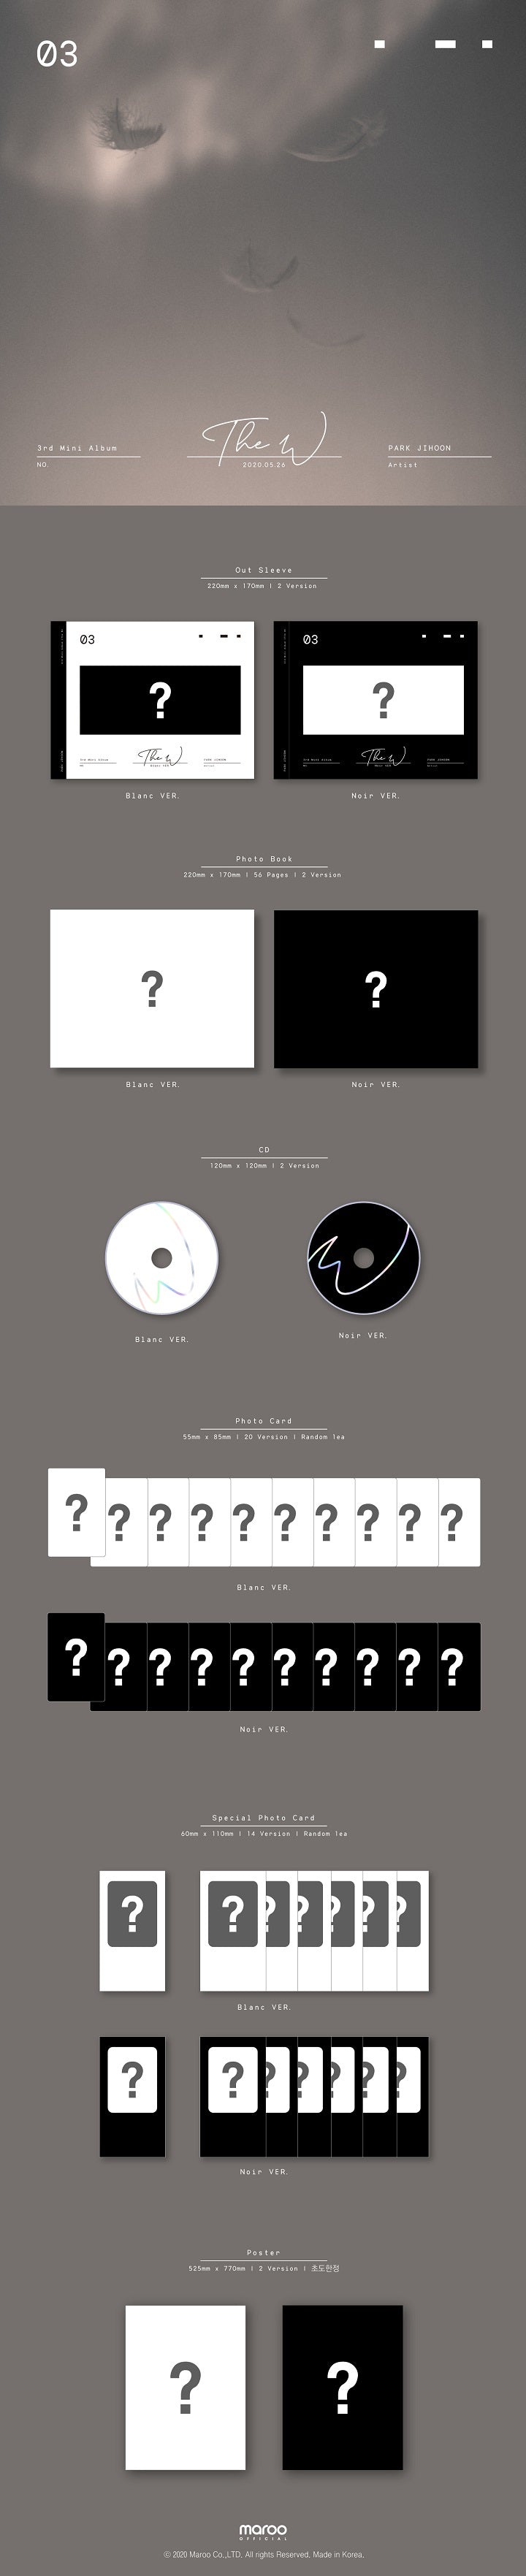 1 CD
1 Photo Book (56 pages)
1 Photo Card
1 Special Card